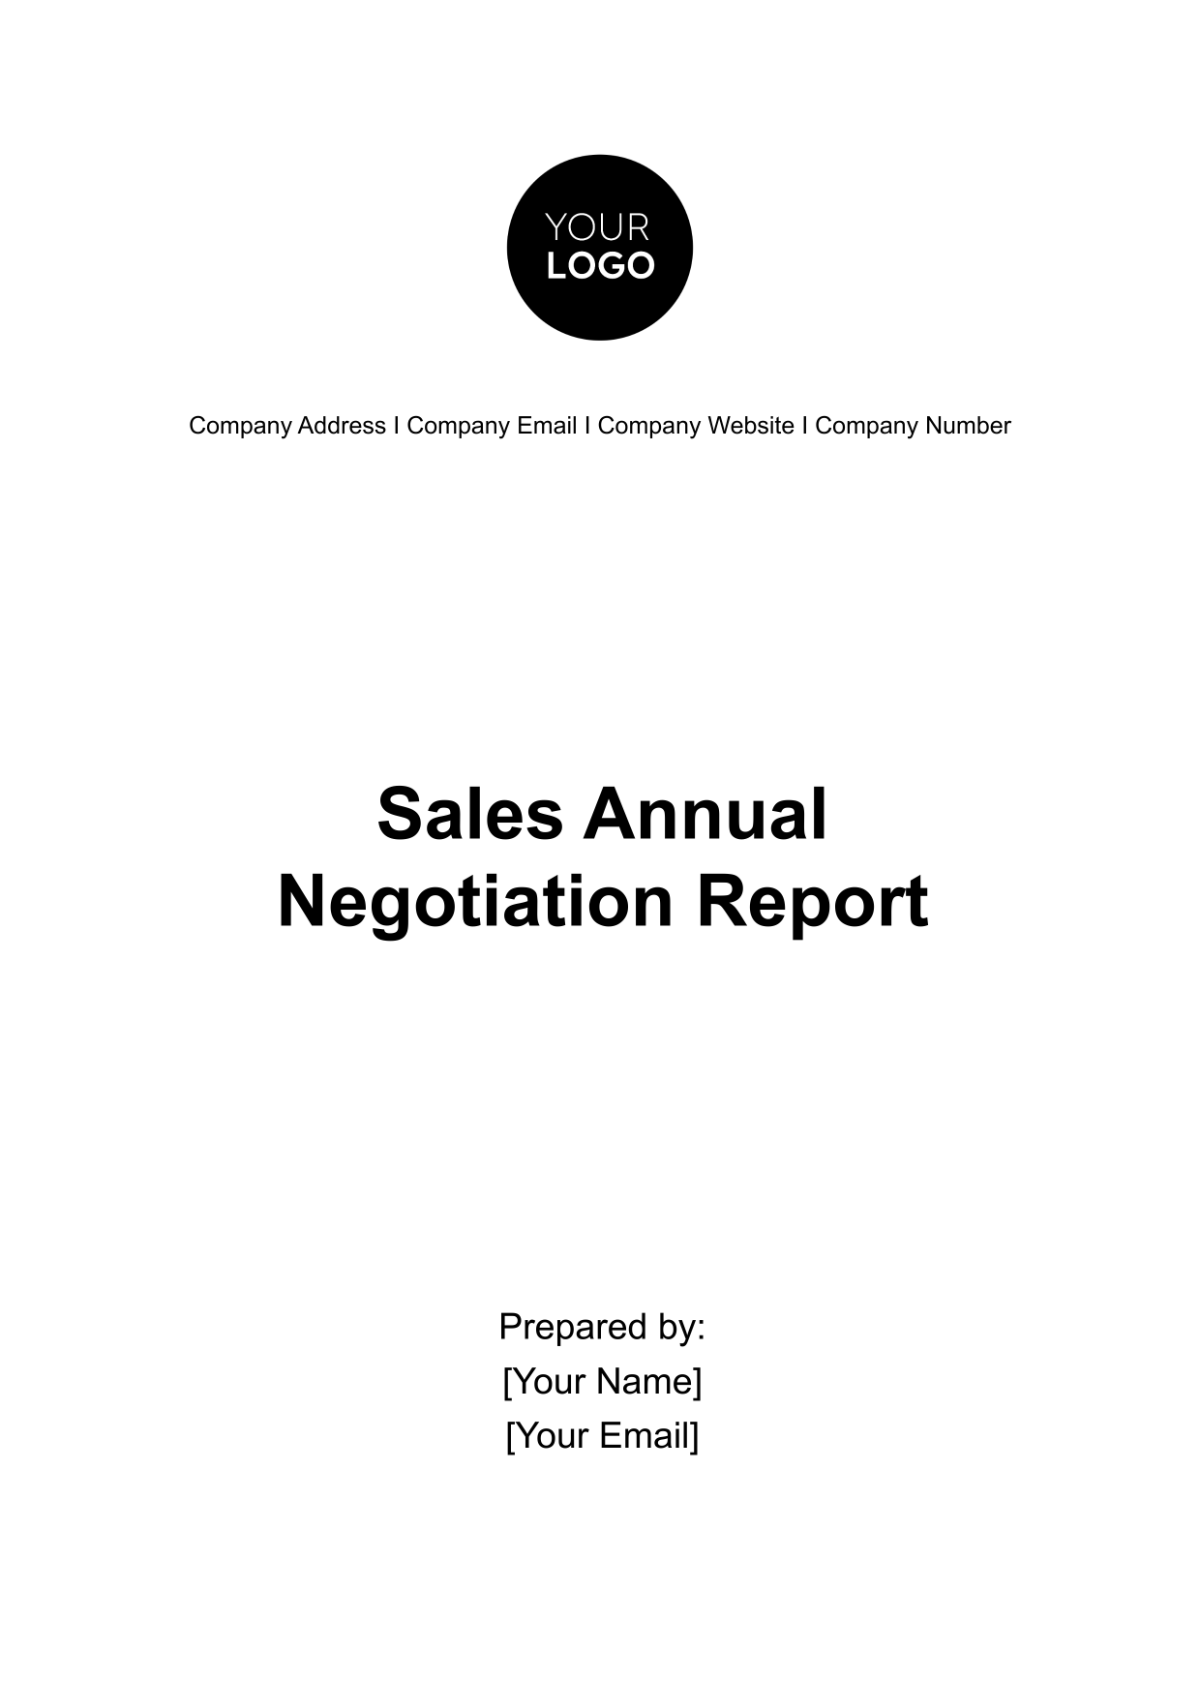 Sales Annual Negotiation Report Template